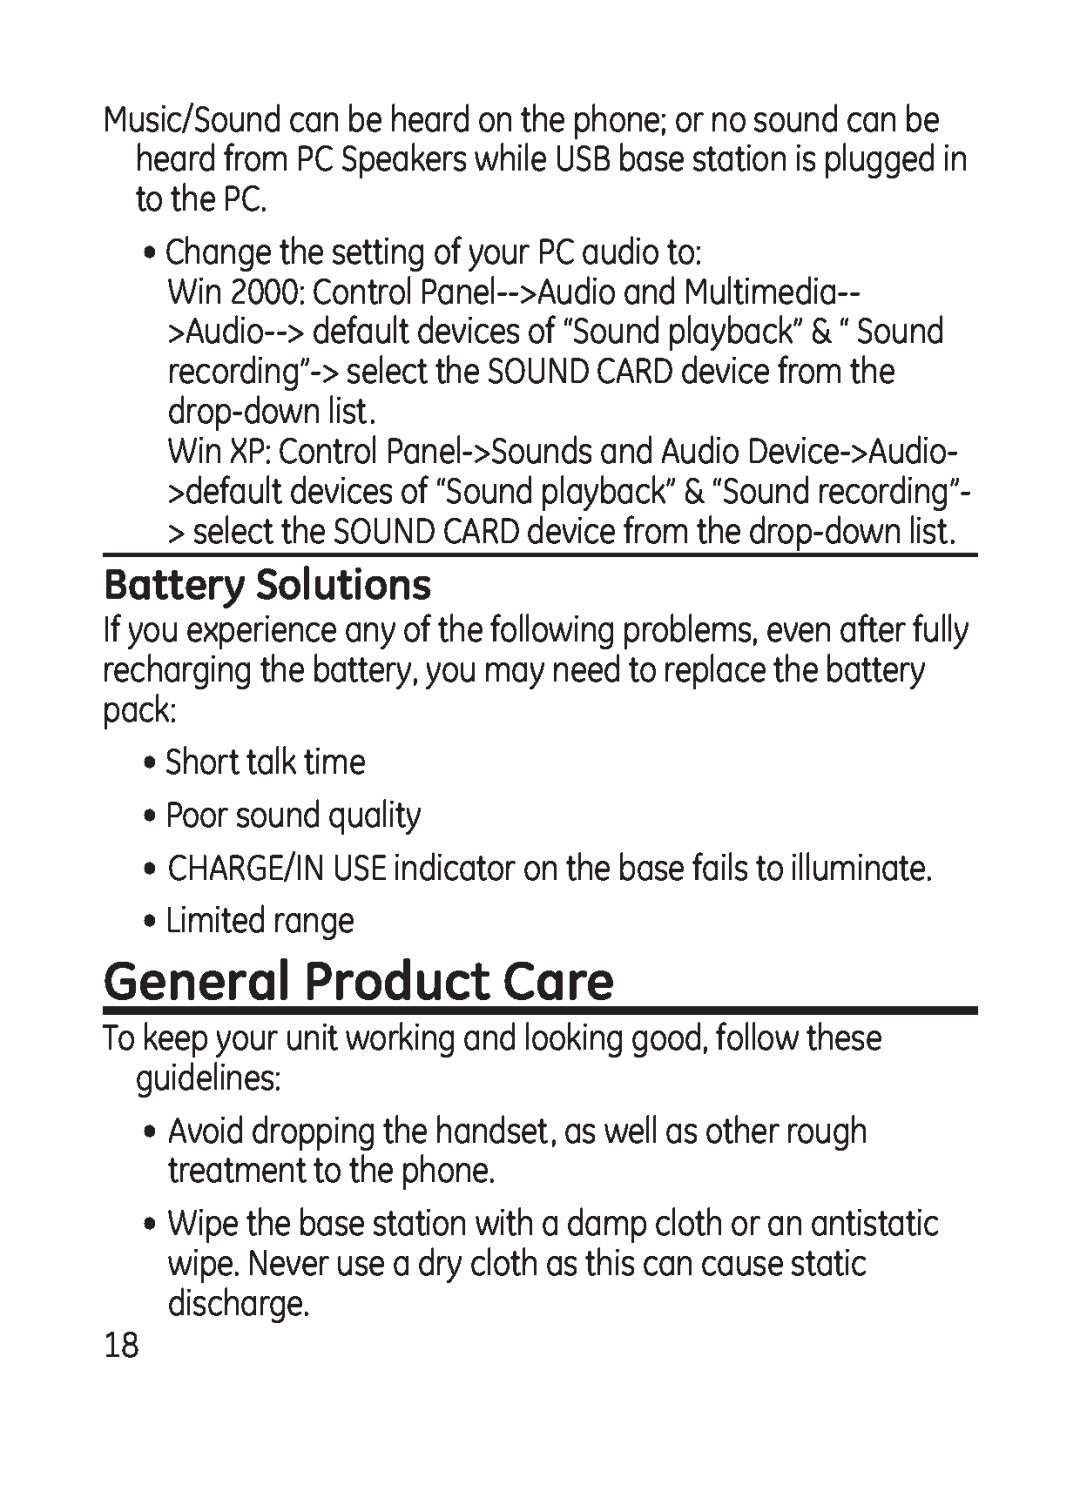 GE 28301 manual General Product Care, Battery Solutions 